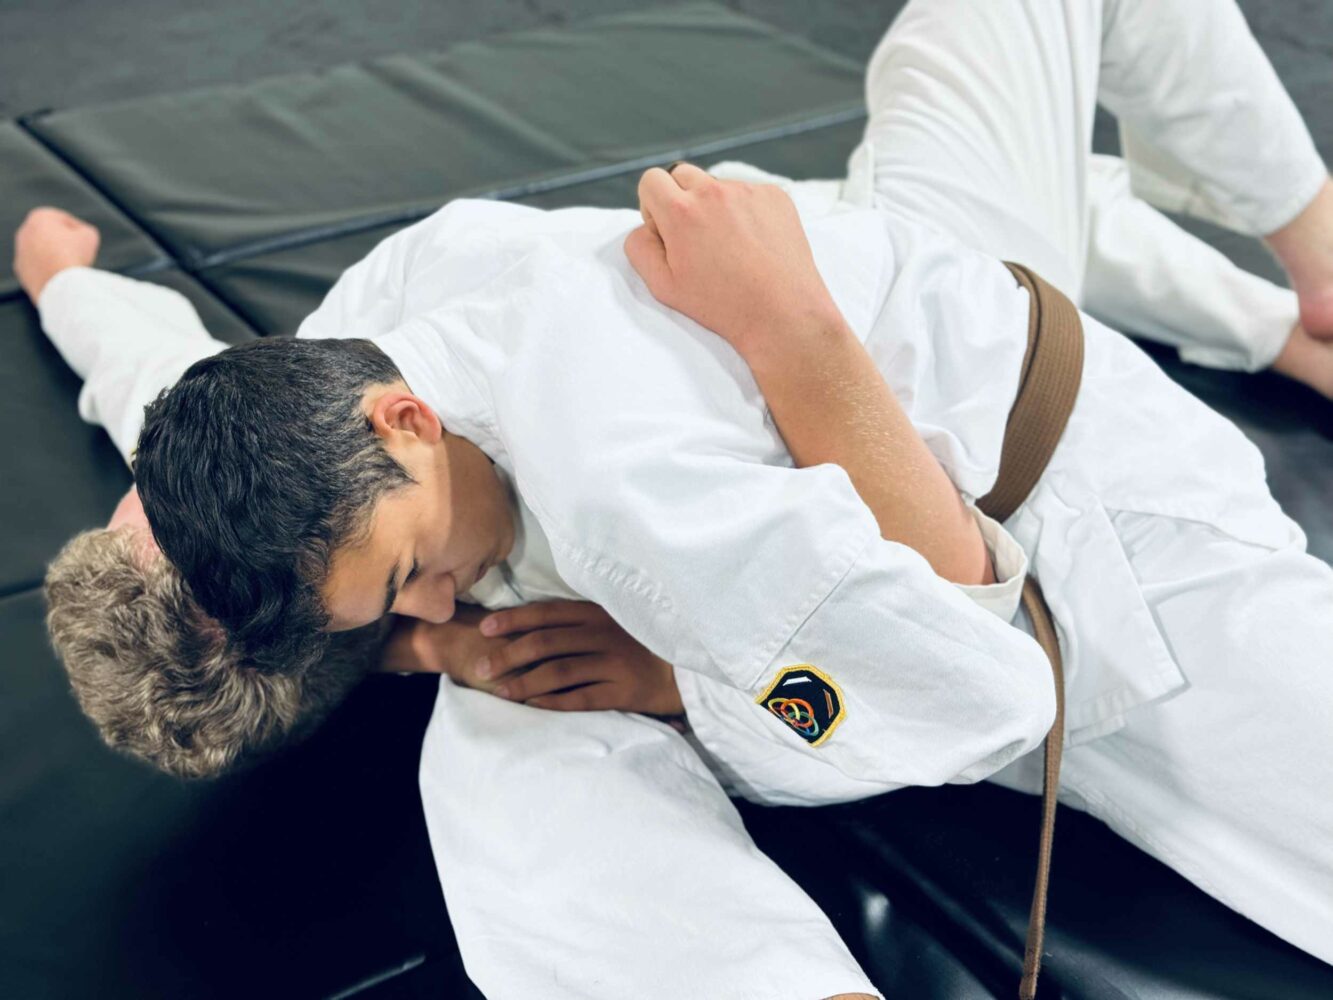 American School of Karate & Judo on Industrial Martial Arts for Kids & Adults